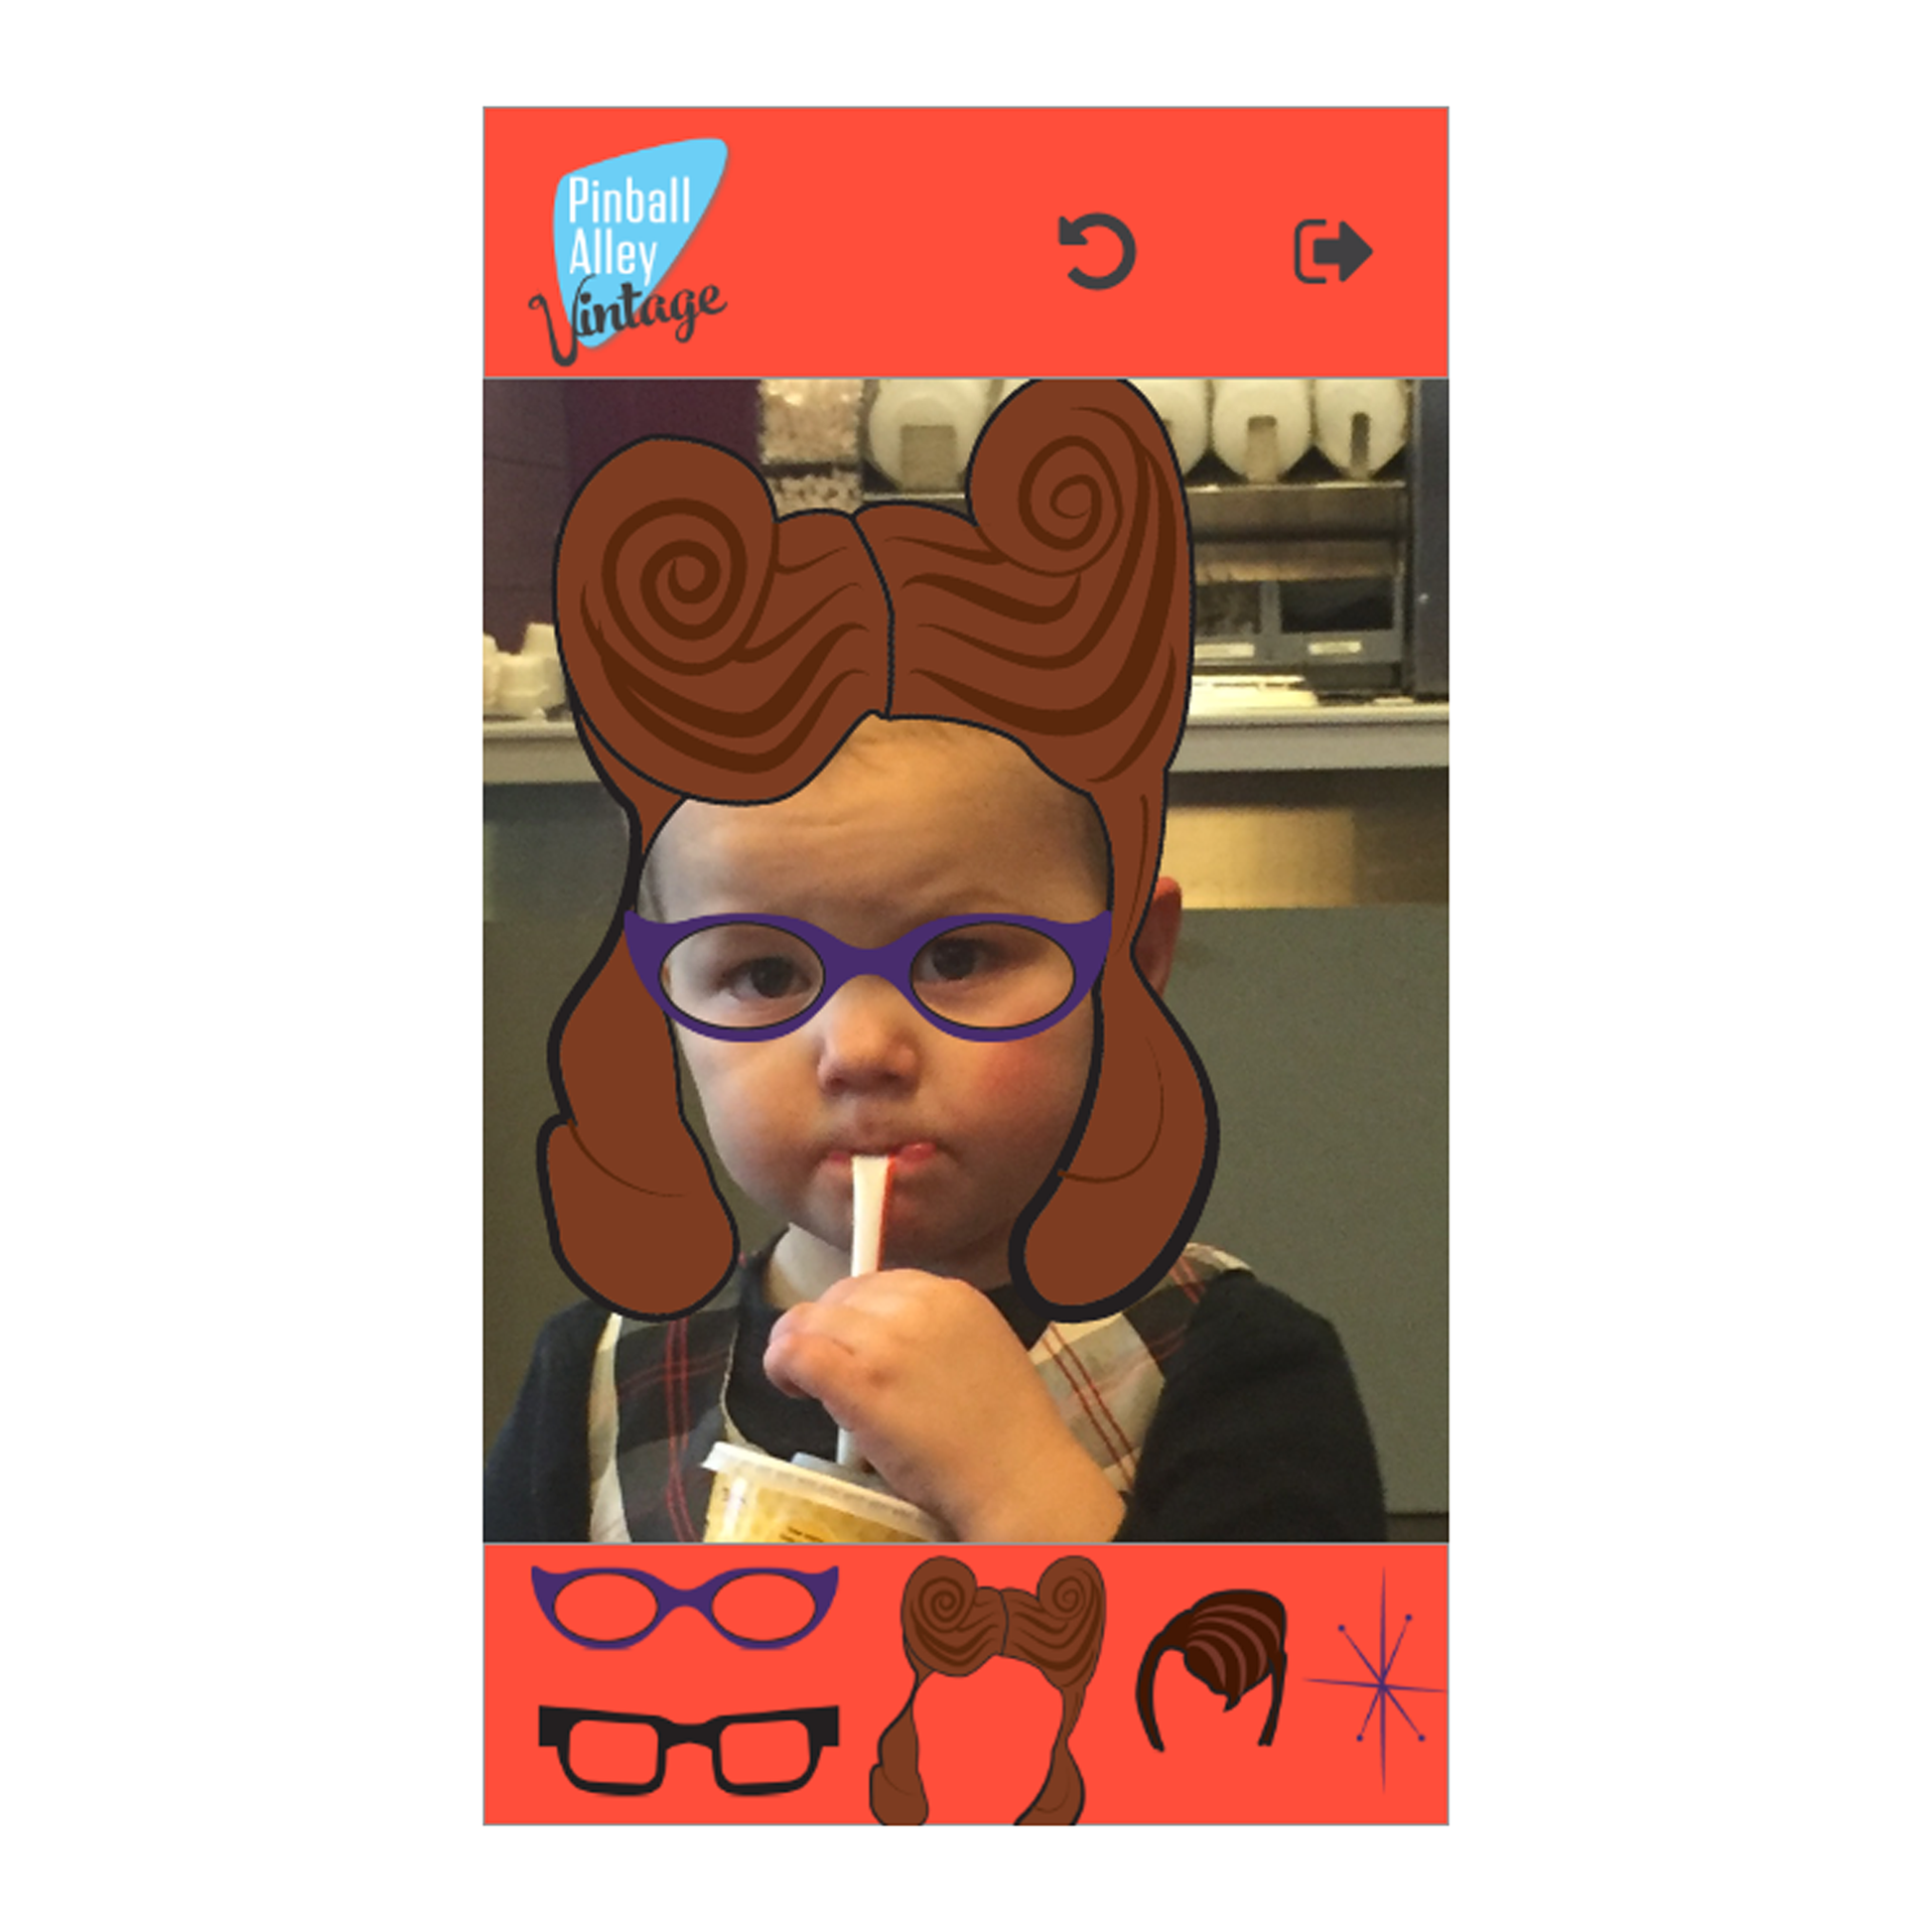 App mockup, retro elements used as filter overlay on image of small child.